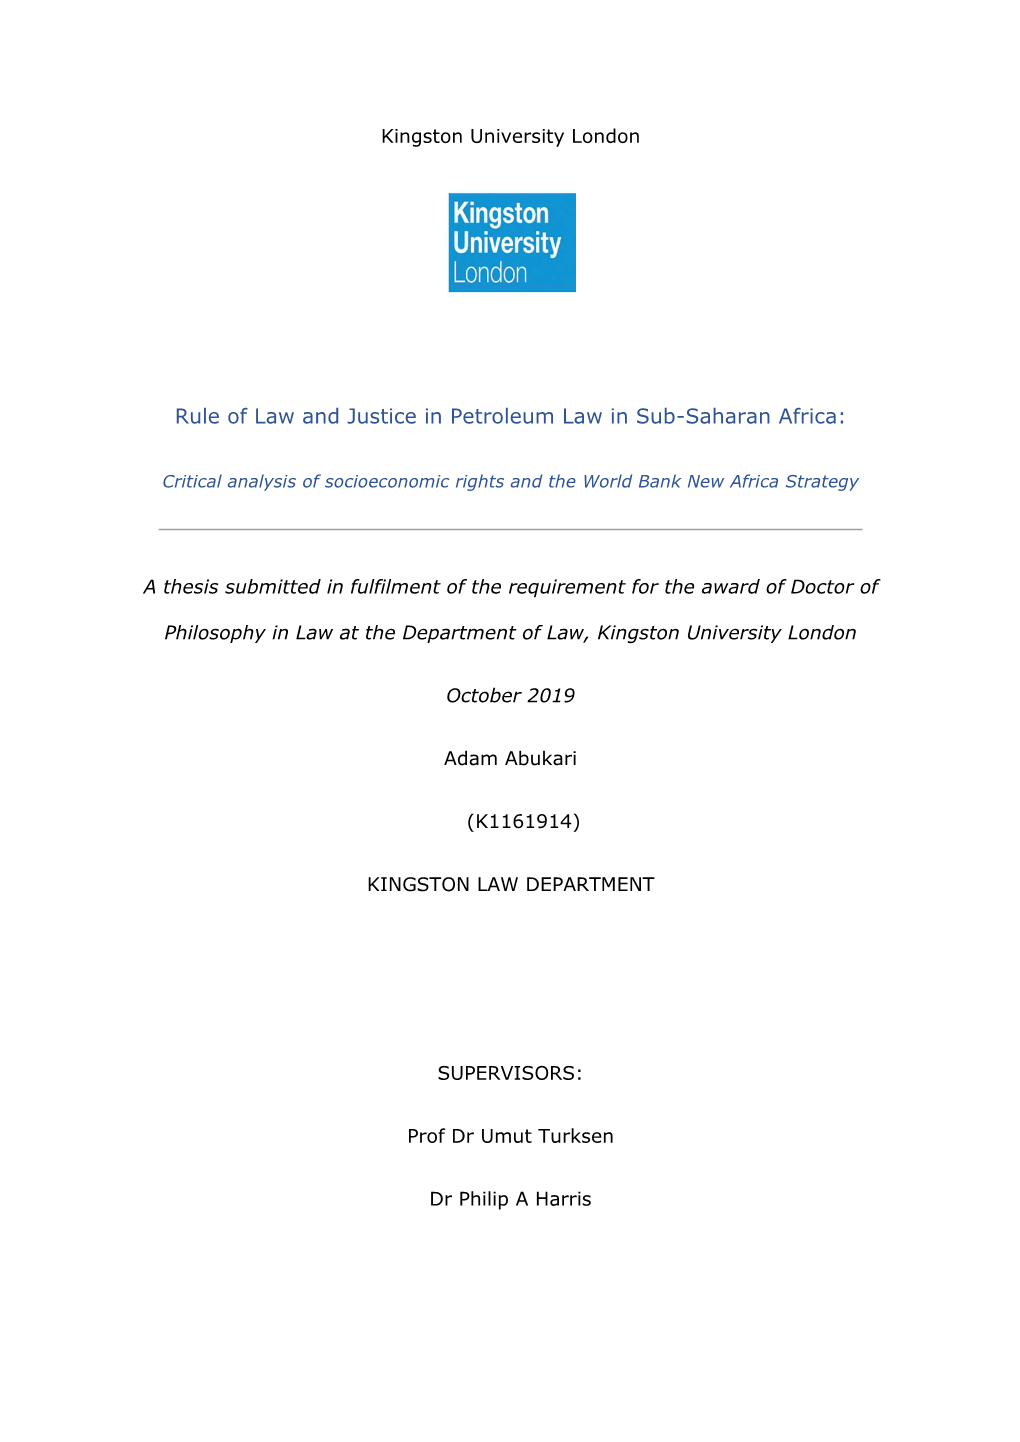 Rule of Law and Justice in Petroleum Law in Sub-Saharan Africa